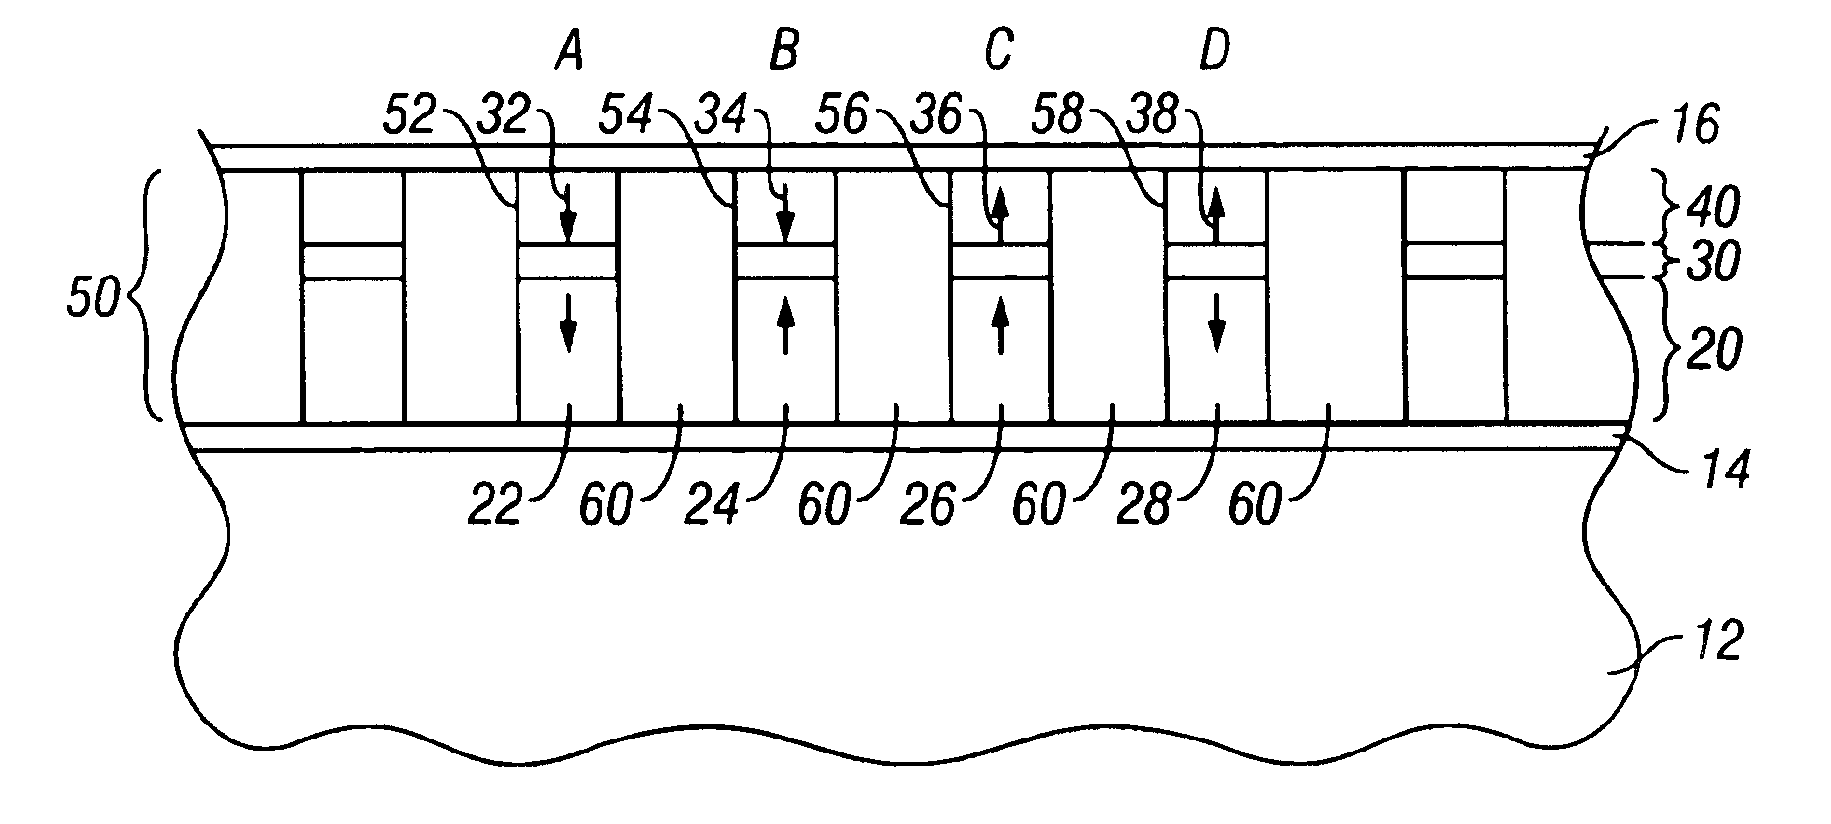 Method for magnetic recording on patterned multilevel perpendicular media using variable write current